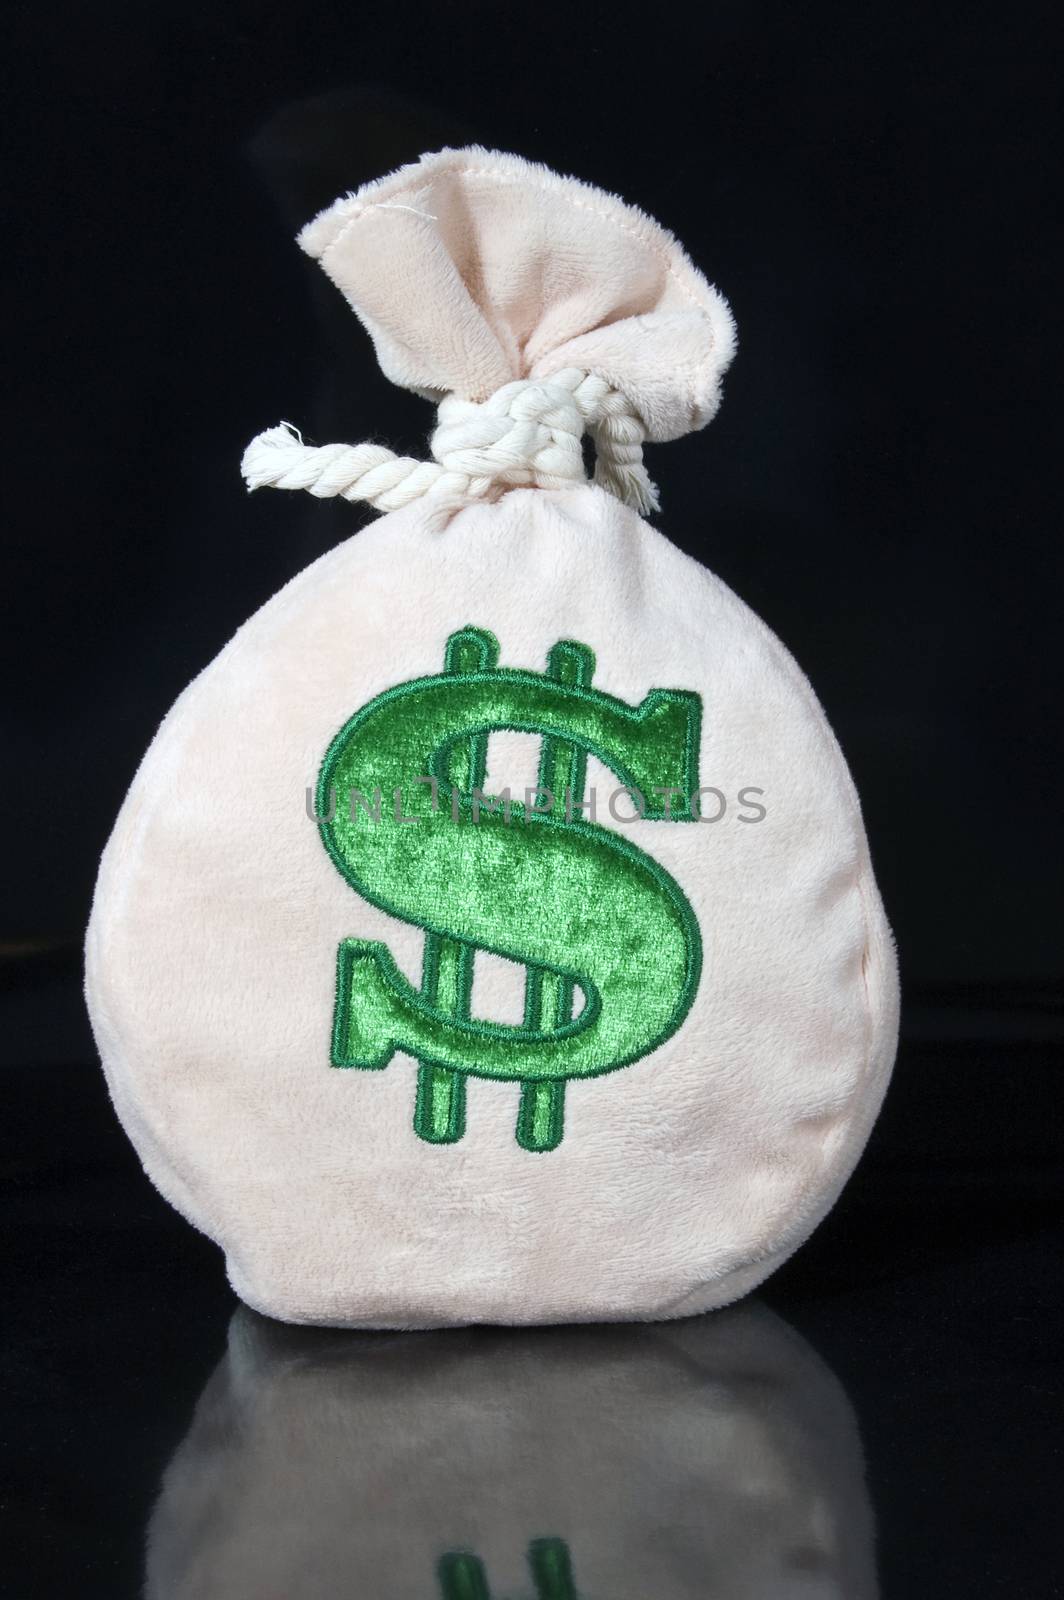 Bag Of Money With Big Dollar Sign by stockbuster1